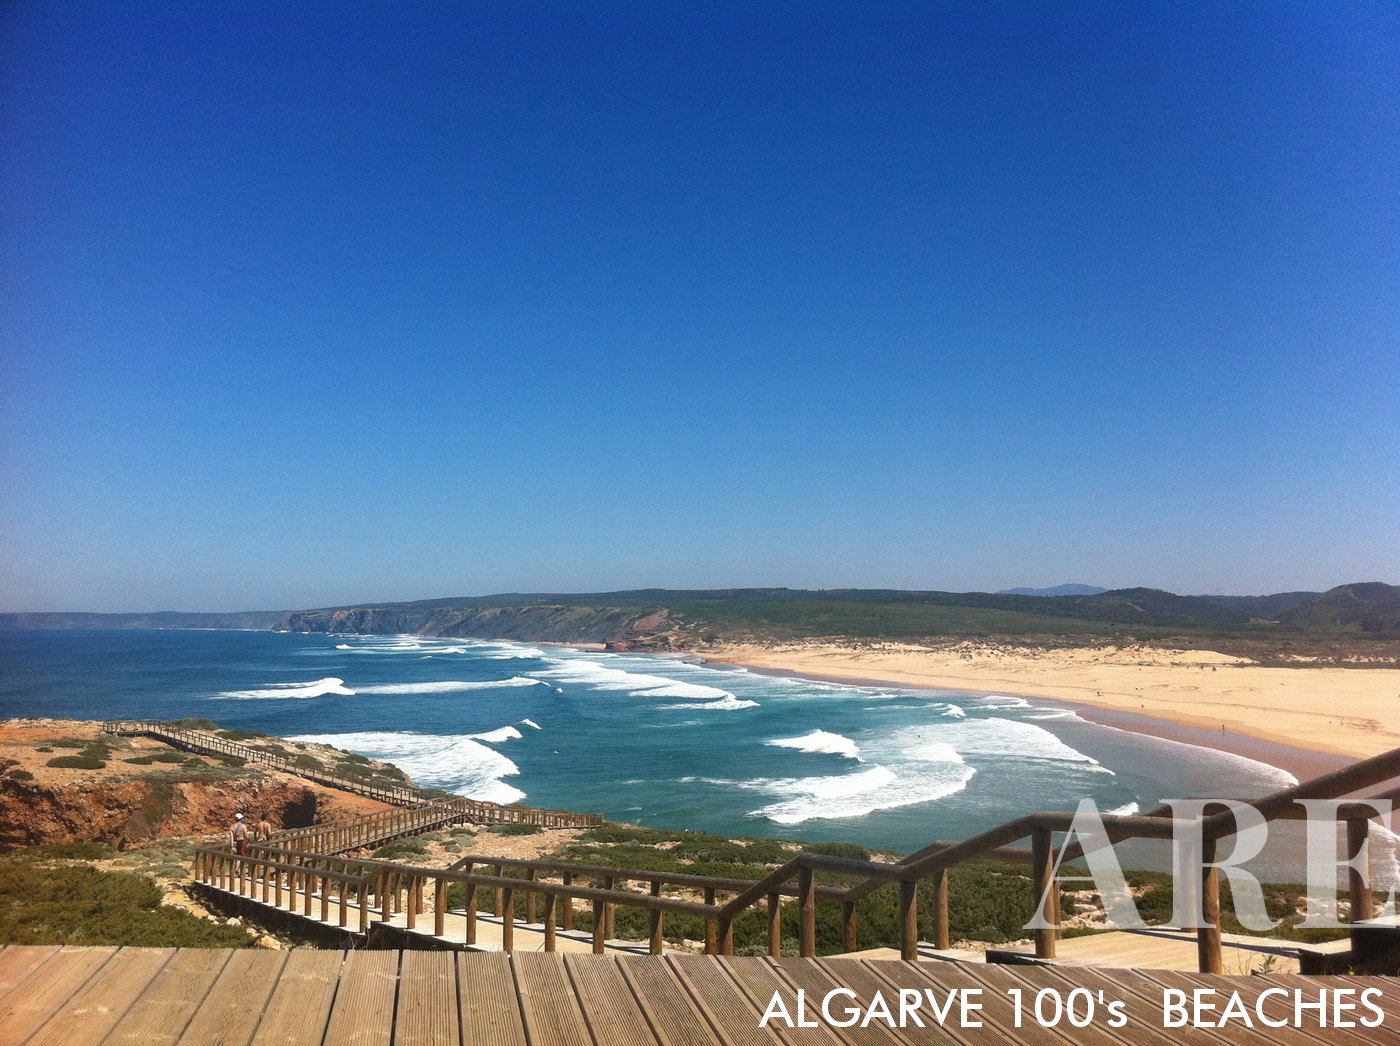 In Carrapateira, Algarve, Portugal, Bordeira Beach is accessible via a wooden walkway. In winter, the beach hosts robust waves and reveals its wild nature